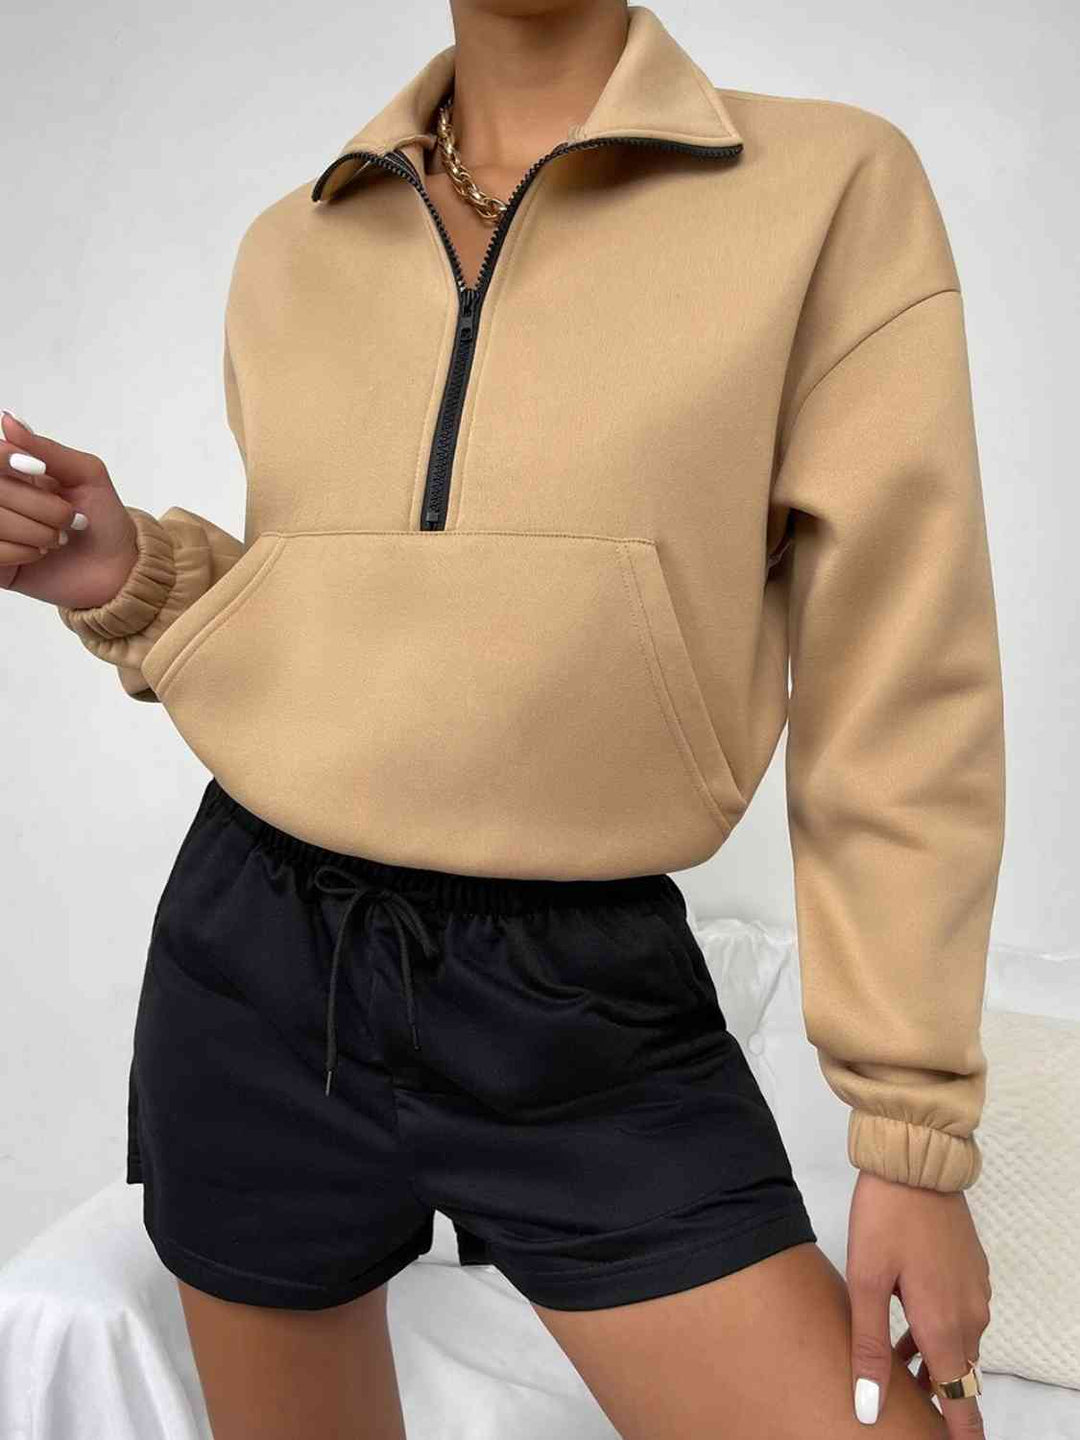 Half-Zip Dropped Shoulder Sweatshirt - sweatshirt - Wild Willows Boutique - Massapequa, NY, affordable and fashionable clothing for women of all ages. Bottoms, tops, dresses, intimates, outerwear, sweater, shoes, accessories, jewelry, active wear, and more // Wild Willow Boutique.